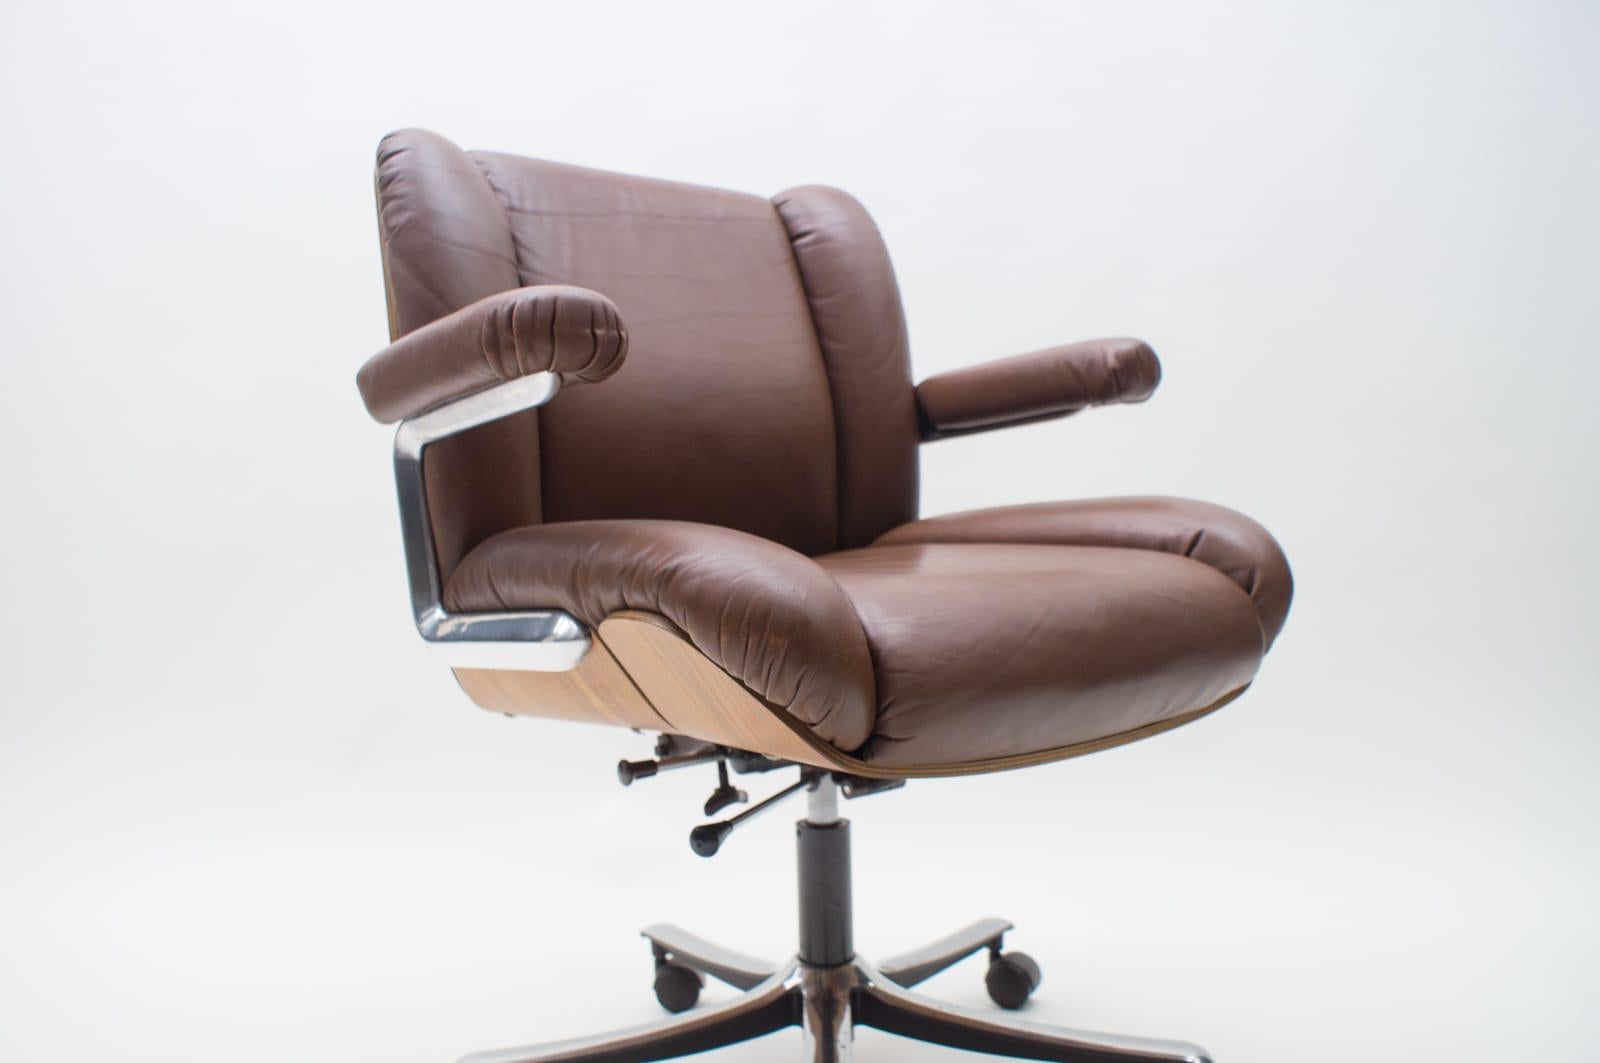 The seat height is adjustable from 45cm to 54cm.

This rare vintage Swiss desk chair was designed by Martin Stoll in the 1960s and manufactured by Giroflex in Switzerland. The foot of this chair is made from polished aluminium with a teak veneer